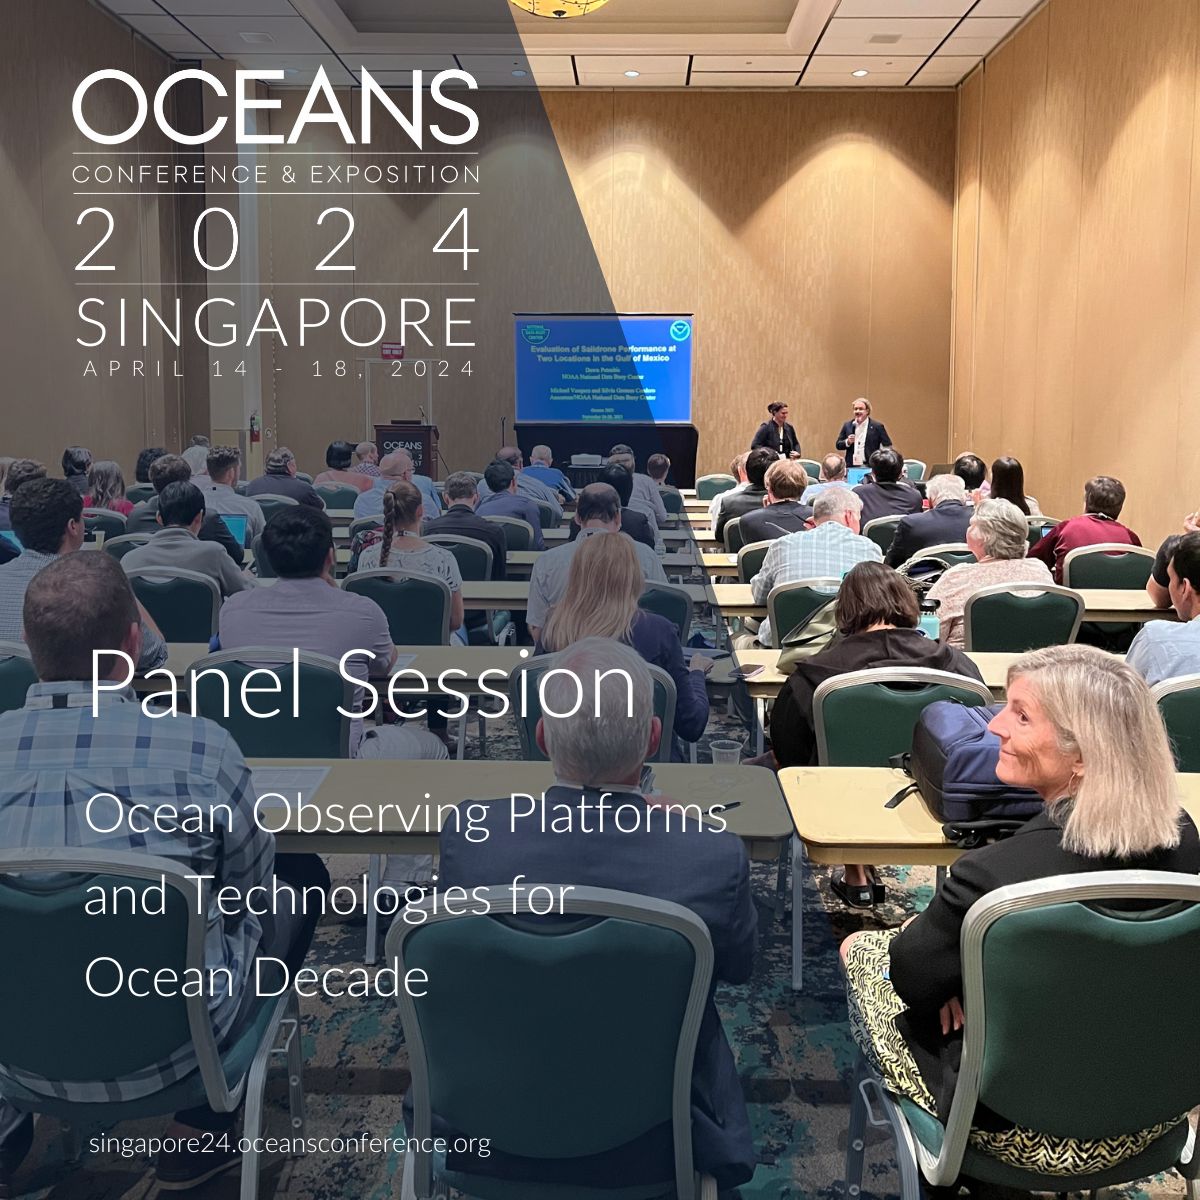 Register now for OCEANS 2024 Singapore! Join us for panel sessions including 'Ocean Observing Platforms and Technologies for Ocean Decade' where experts will showcase cutting-edge technologies and platforms enhancing global ocean observing capacity. singapore24.oceansconference.org/experience/reg…